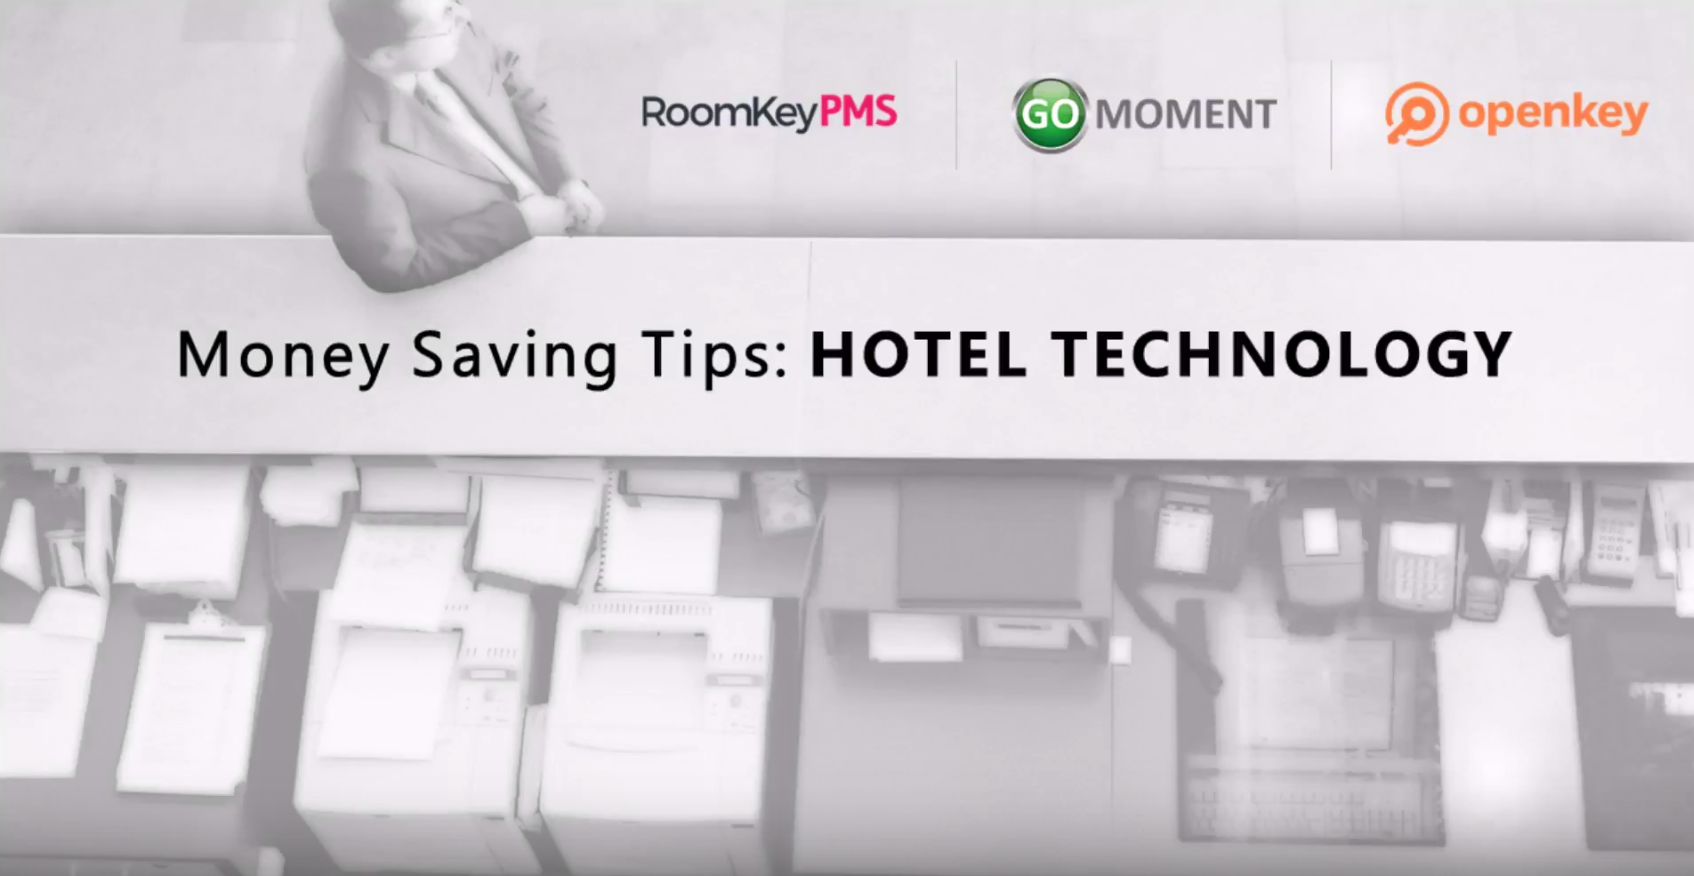 Money Saving Tips for New Hotel Technology in 2017 | RoomKeyPMS